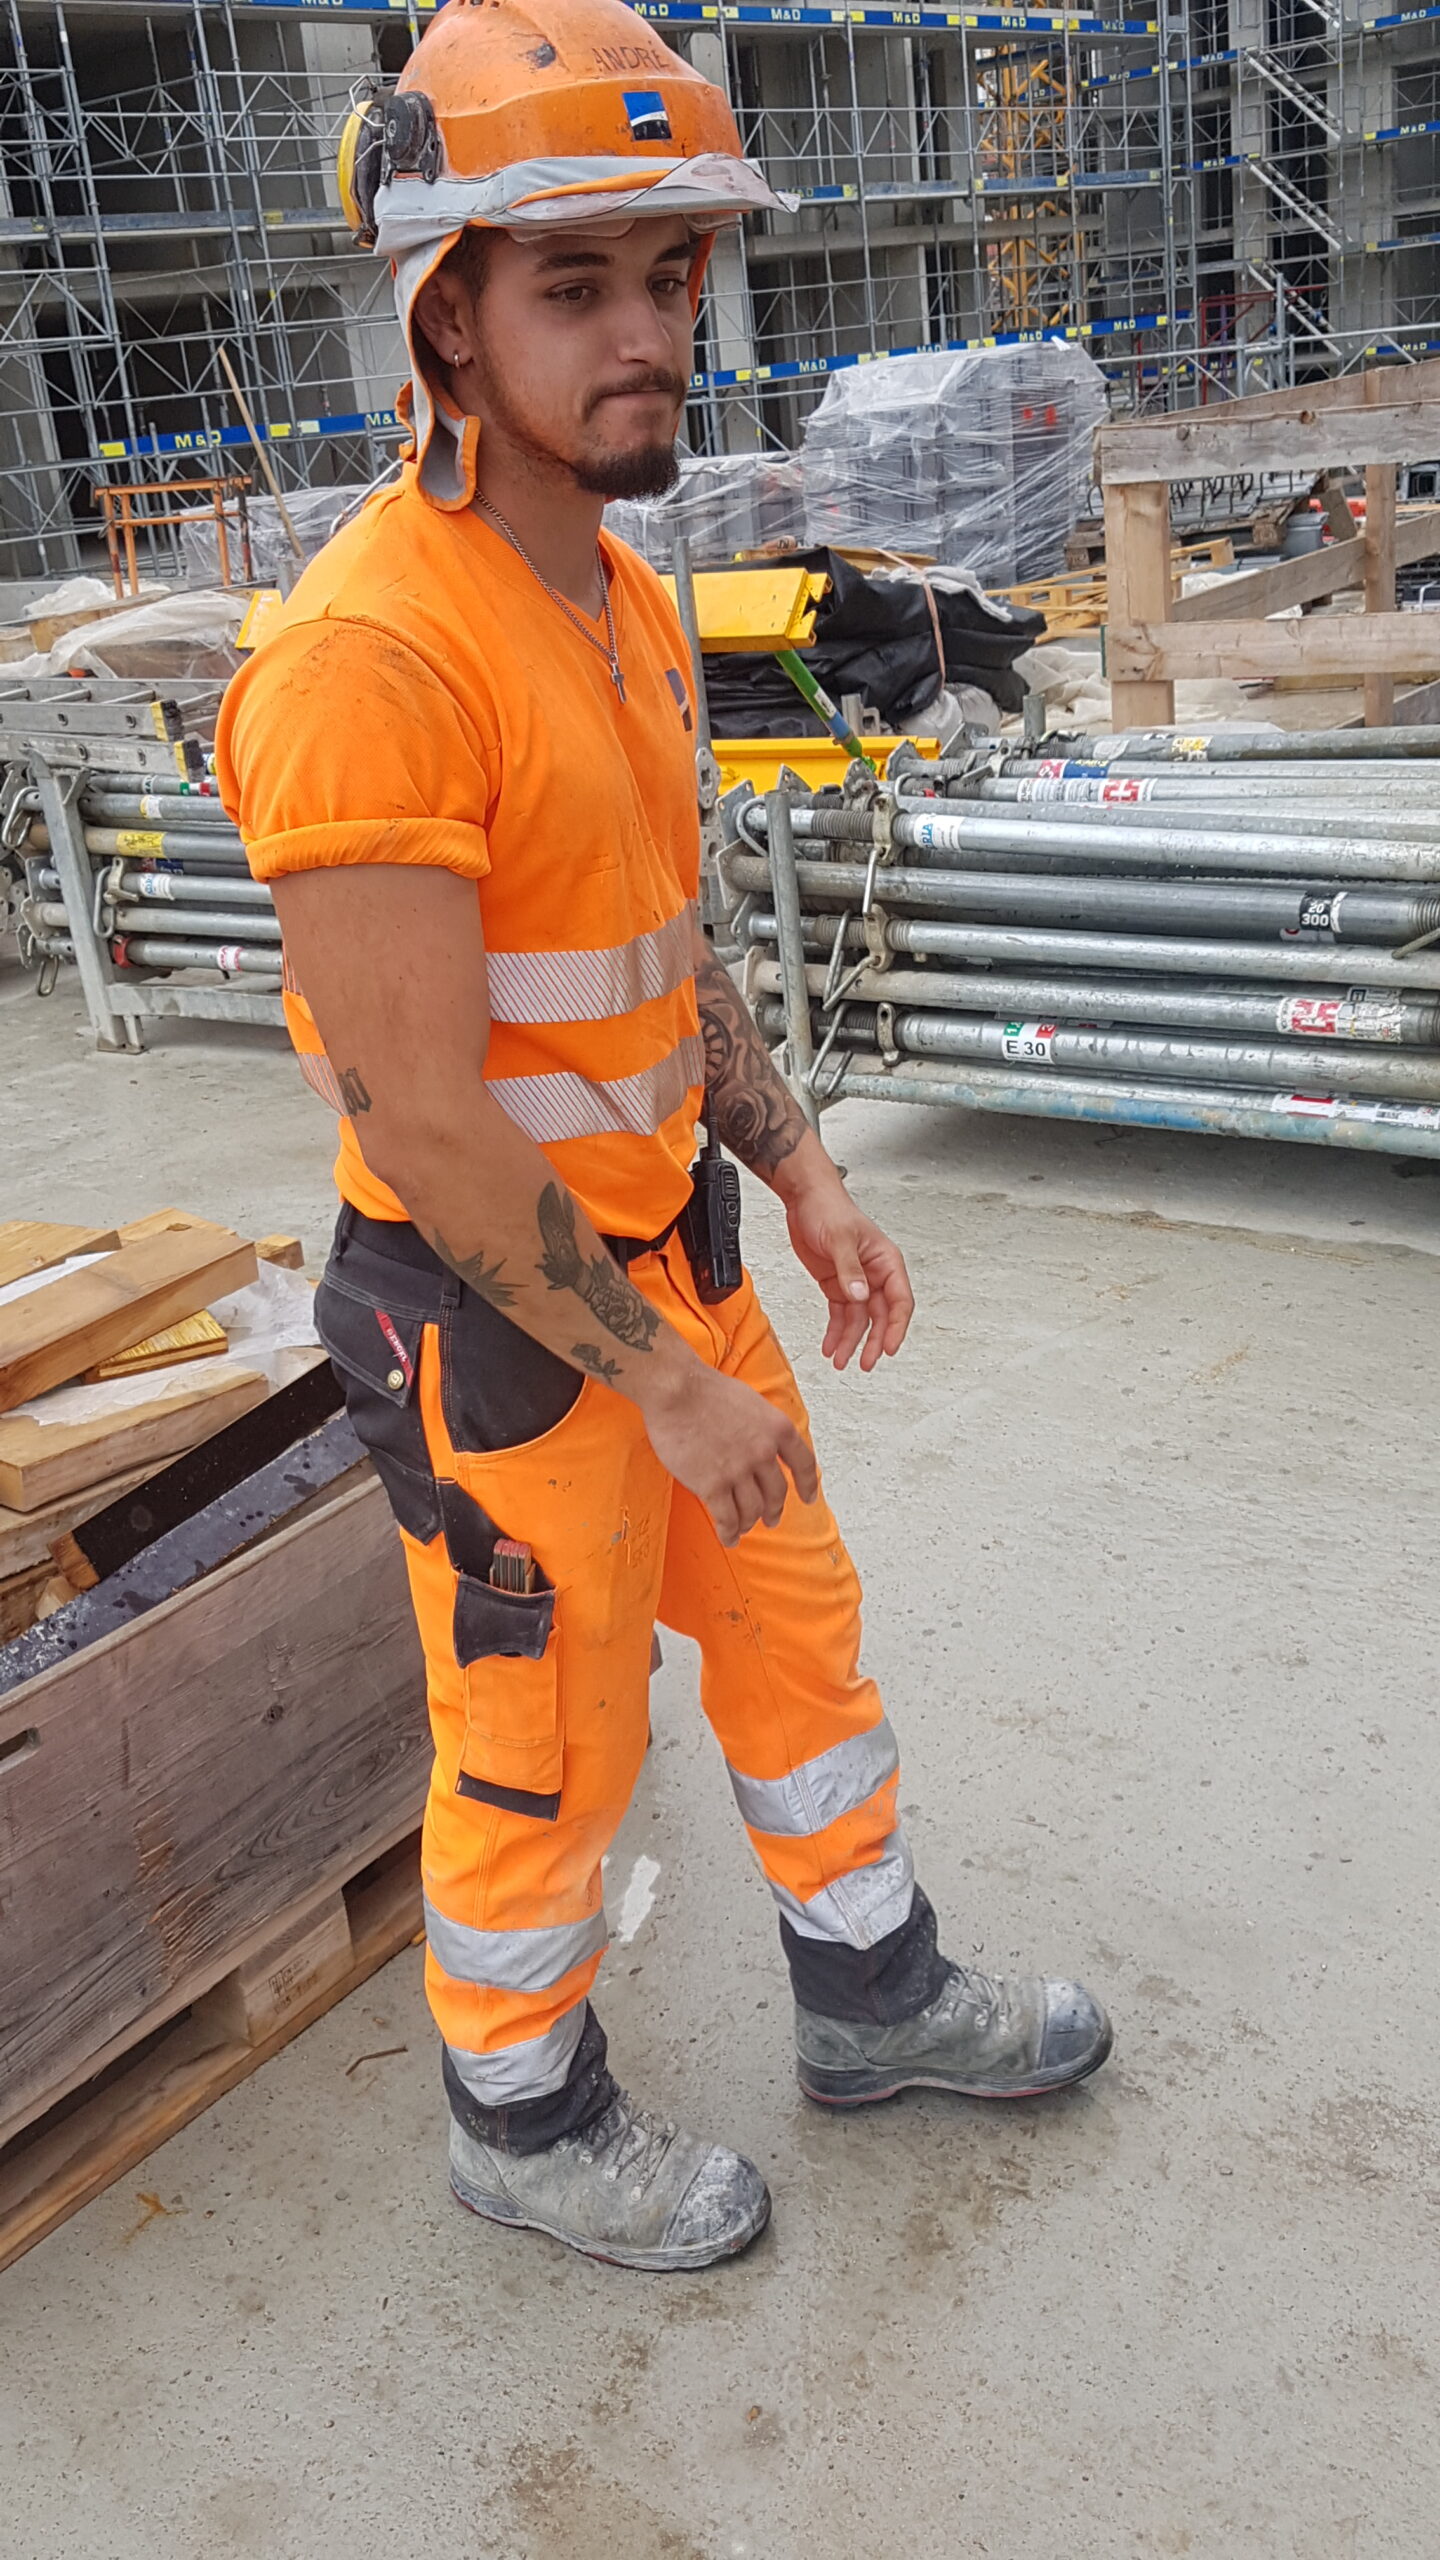 Young construction worker in orange with helmet completed with front visor and cloth neck protection